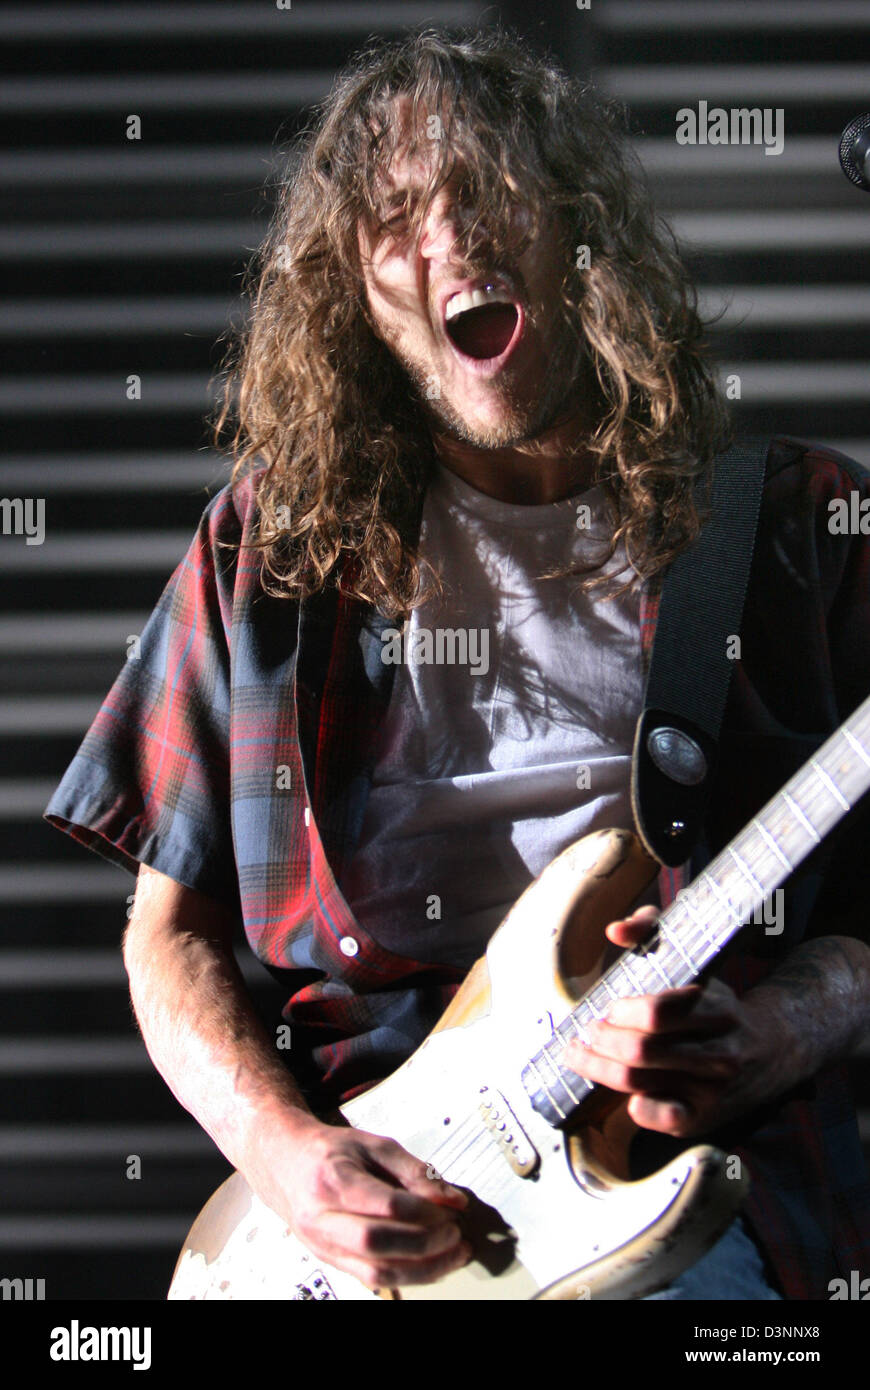 John Frusciante, guitarist of the rock band Red Hot Chili Peppers performs at their concert in the 'Westfalen Halle', Dortmund, Germany, Sunday, 11 June 2006. Photo: Achim Scheidemann Stock Photo